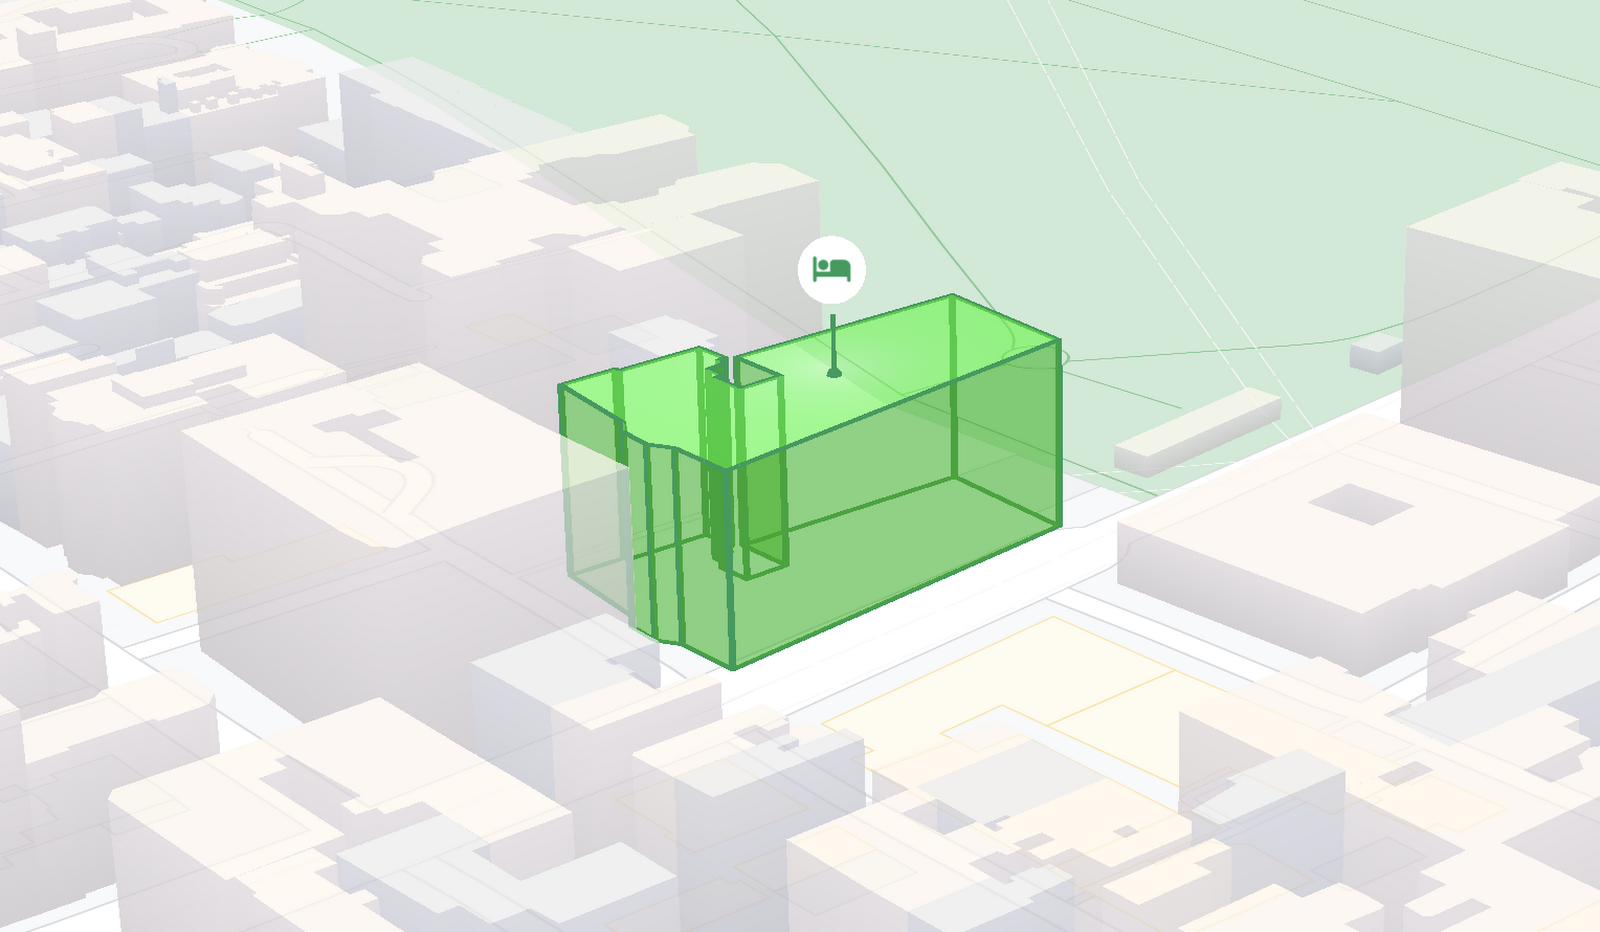 A 3D building model overlaid on a map.